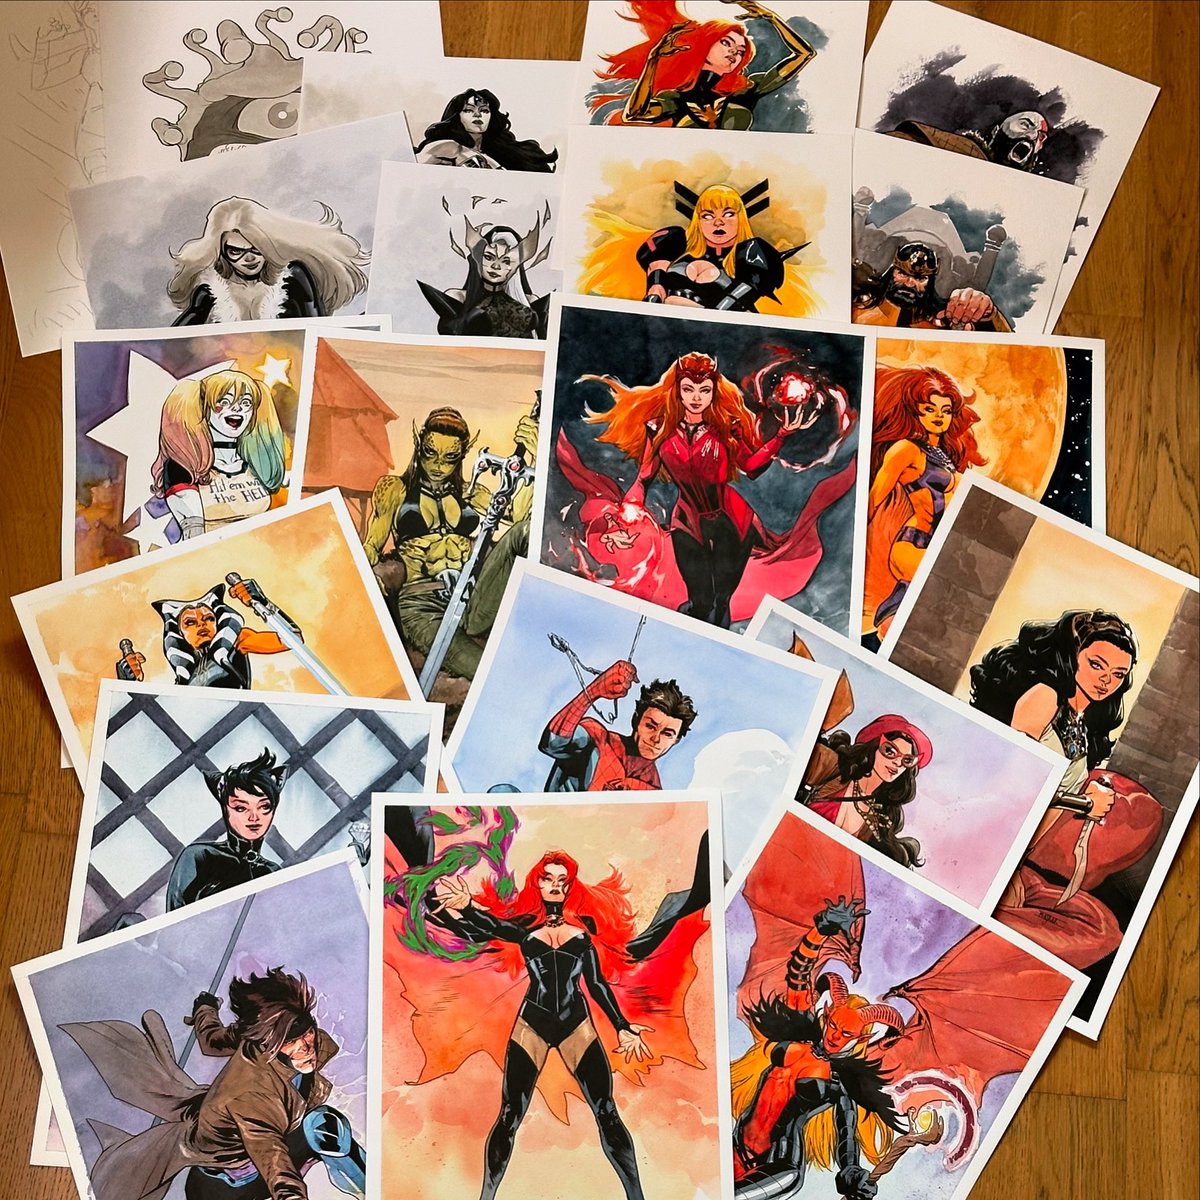 Almost all of the commissions I made for Lake Como Comic Art Festival. Can you guess who everyone is from this pic? Looking forward to being there this weekend! @como_art_fest